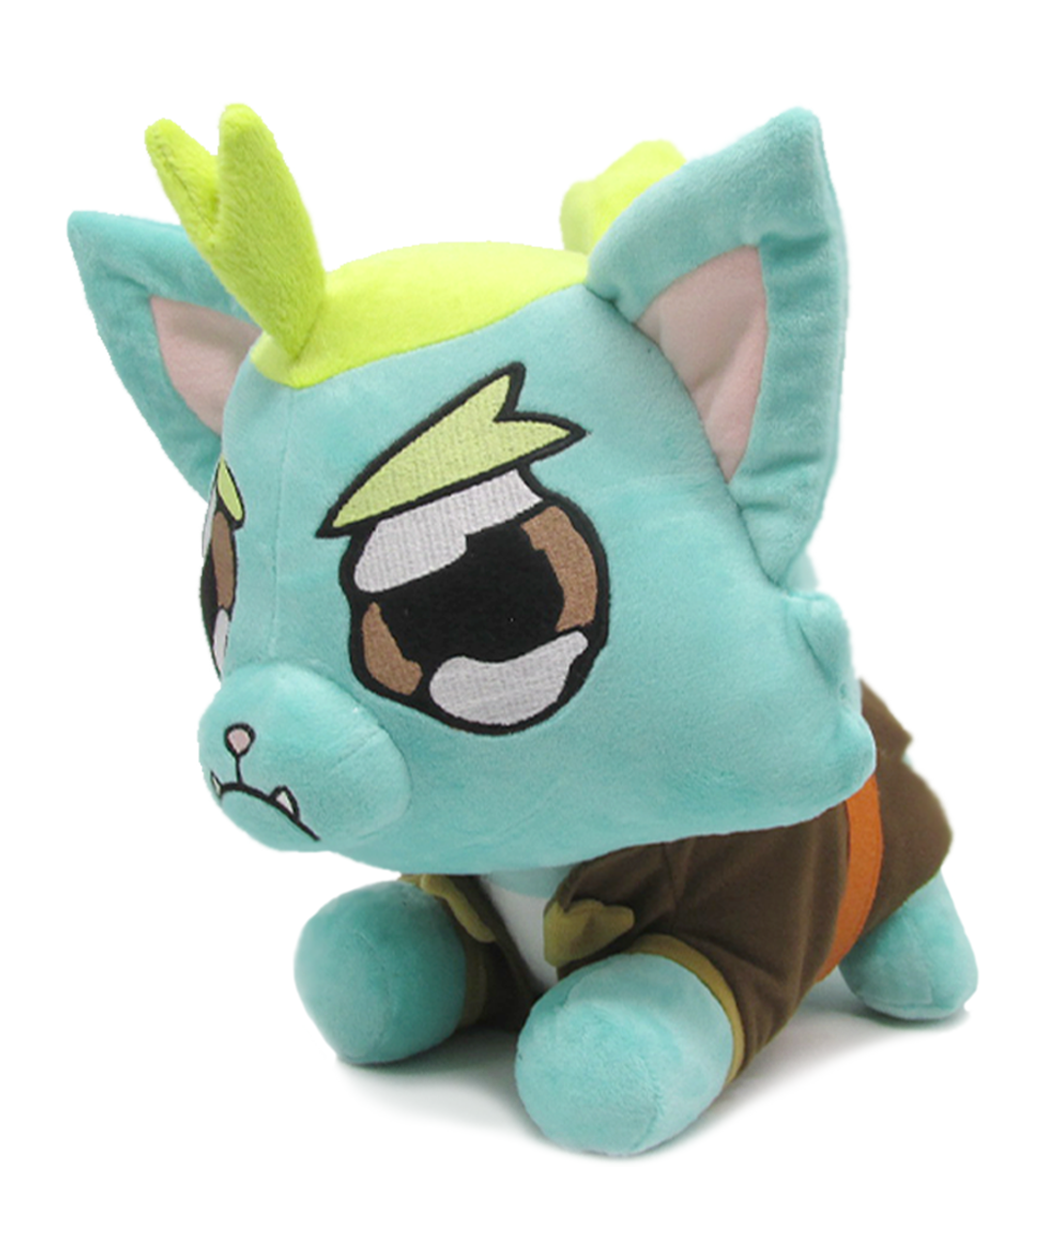 A teal plushie shaped like a dog type creature with a frowny face. Represents P'Boy from Drawfee. 